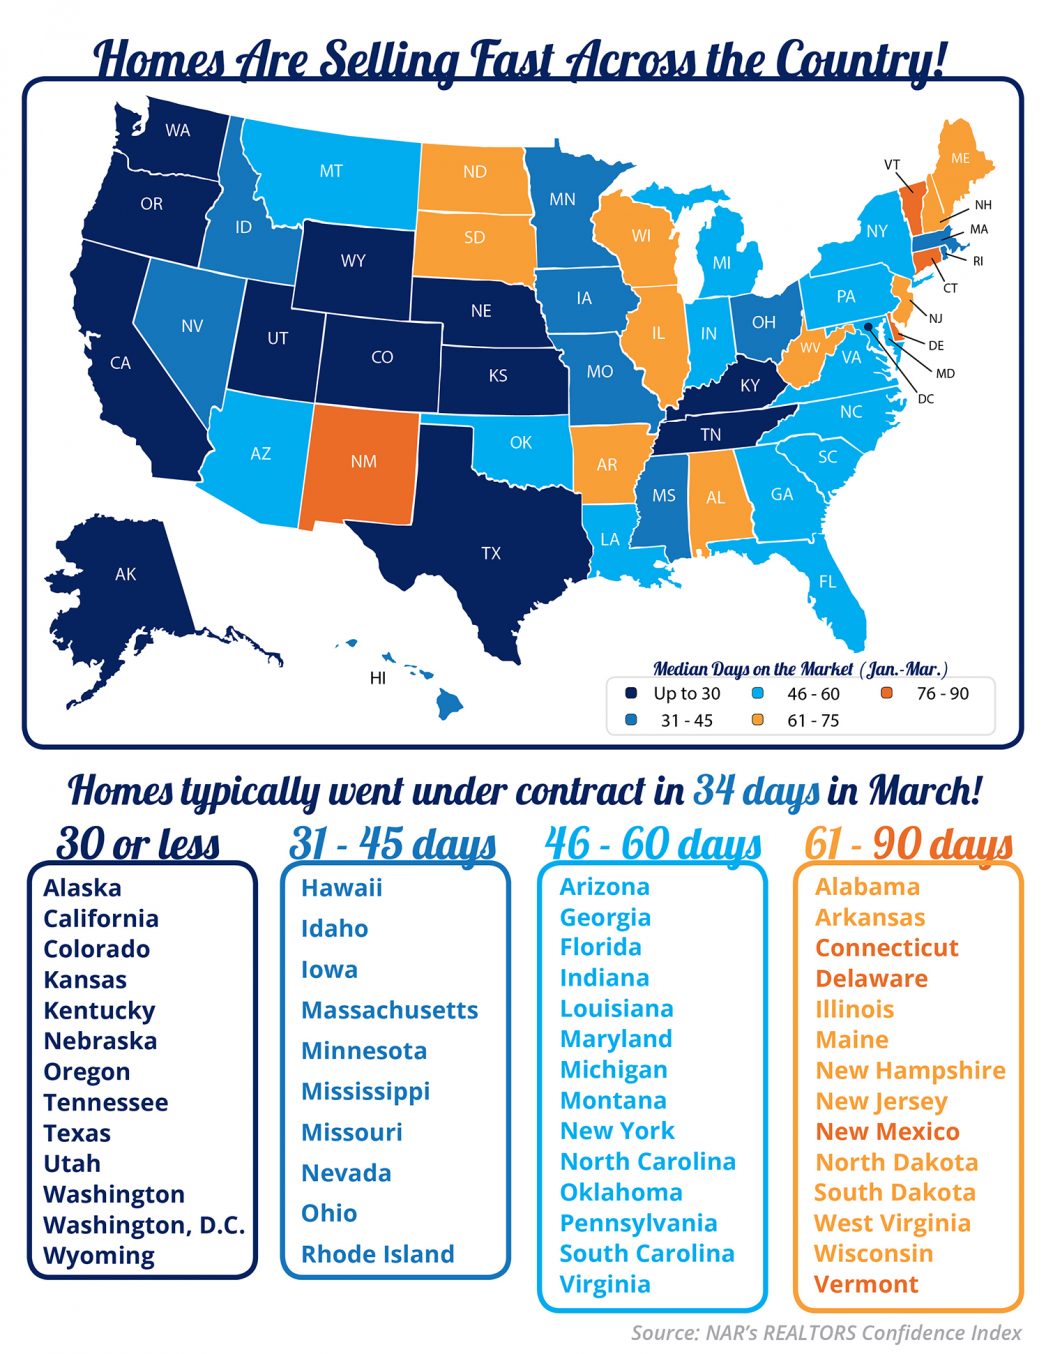 Homes are Selling Fast Across the Country [INFOGRAPHIC] | MyKCM